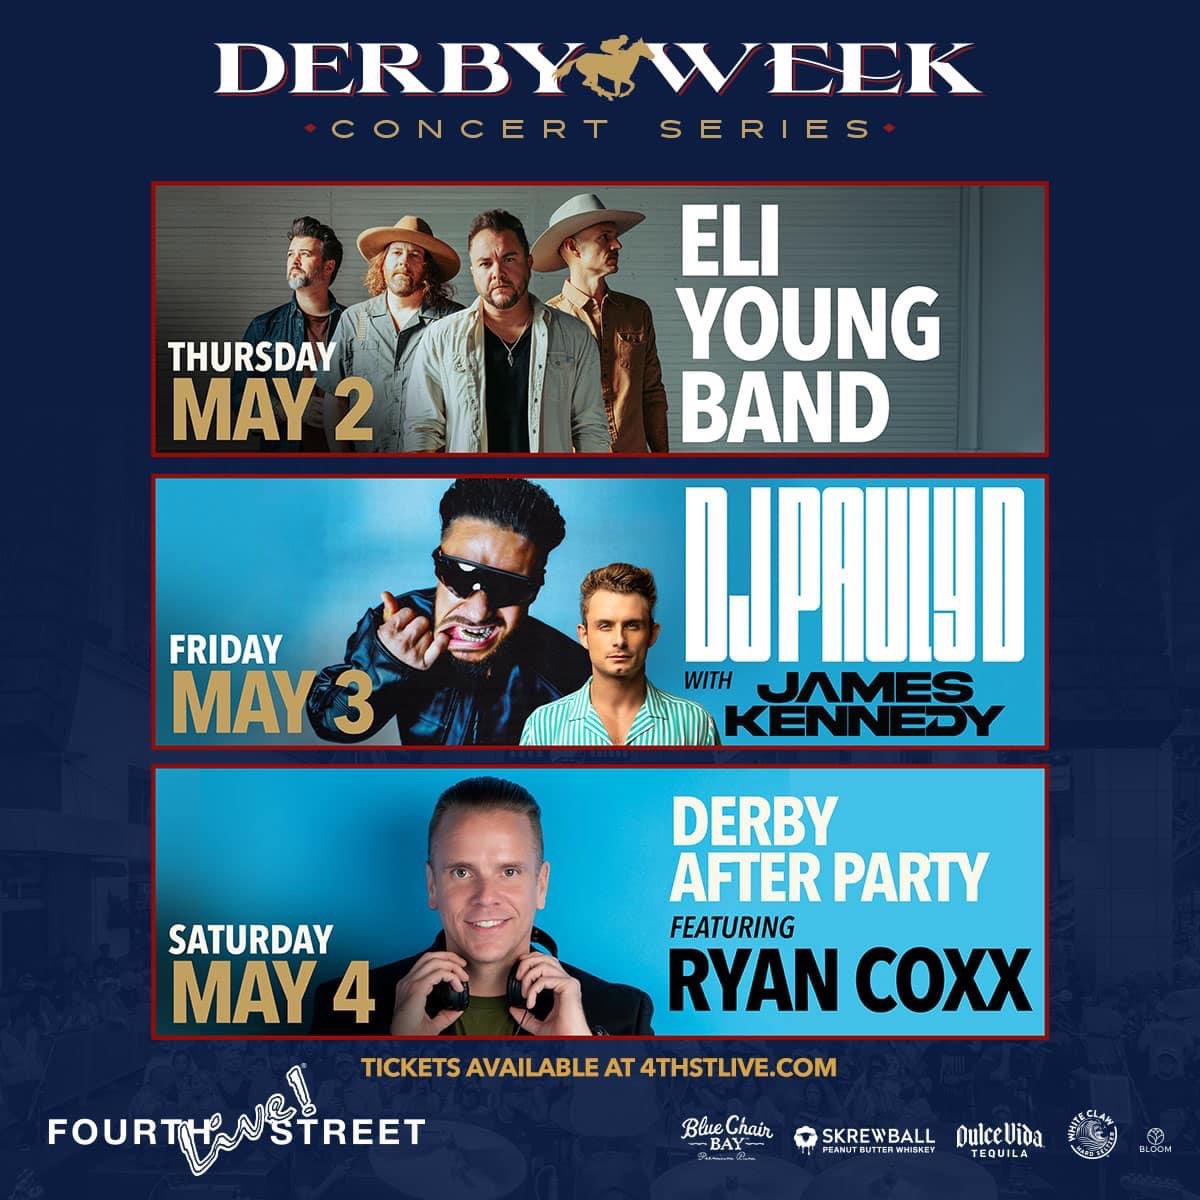 JUST ANNOUNCED This year’s Derby Week Concert Series lineup is here! Eli Young Band - Thursday, May 2 DJ Pauly D with James Kennedy - Friday, May 3 Derby After Party featuring Ryan Coxx (Free Admission) - Saturday, May 4 Tickets go on sale this Friday, April 5 at 10AM!